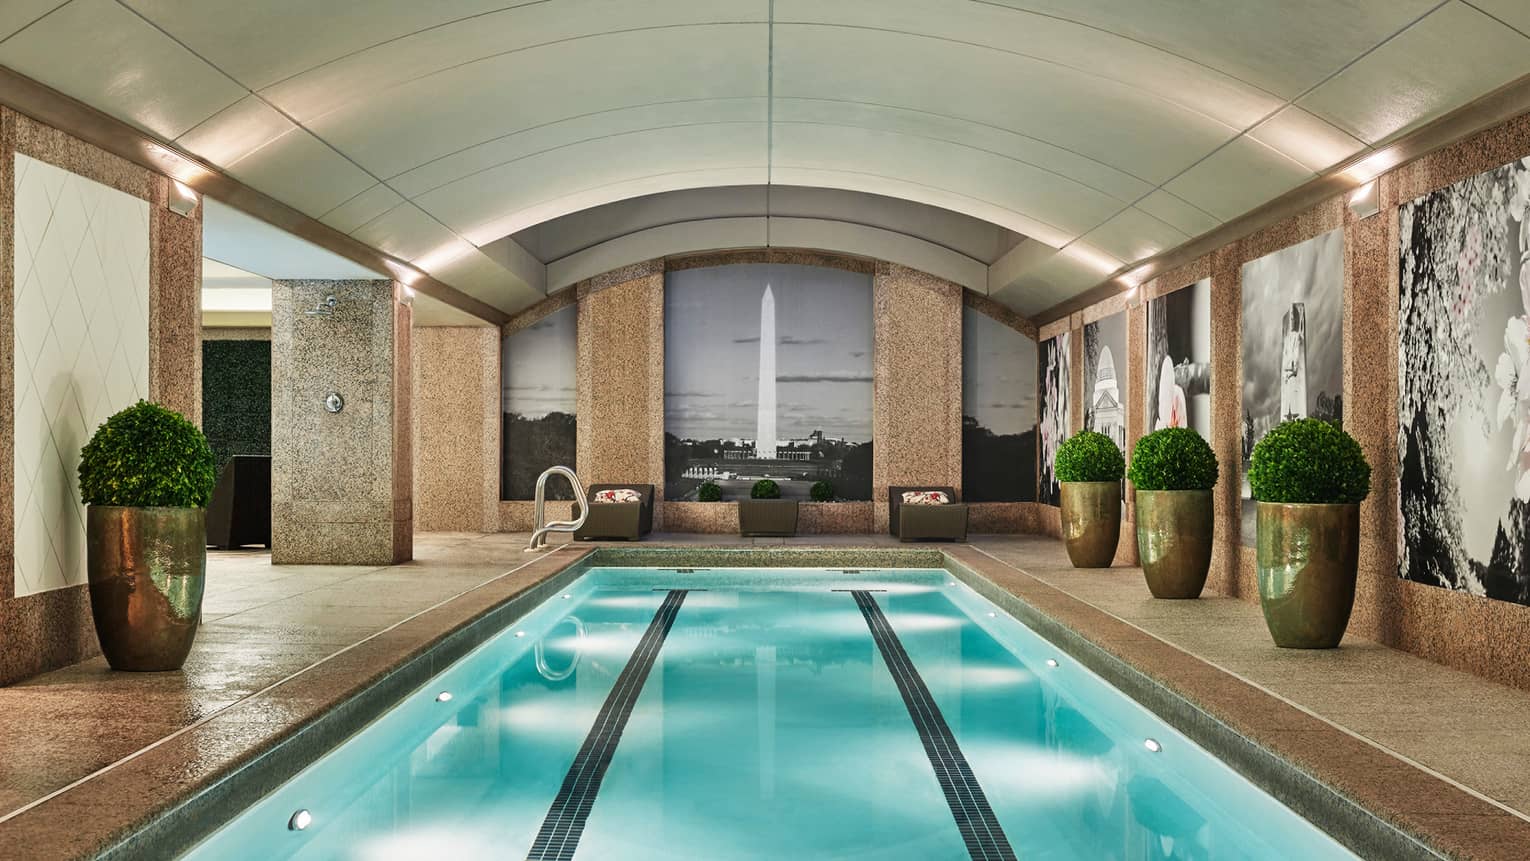 Long indoor lap swimming pool, large gold planters on deck, wall with black-and-white mural of the Washington Monument